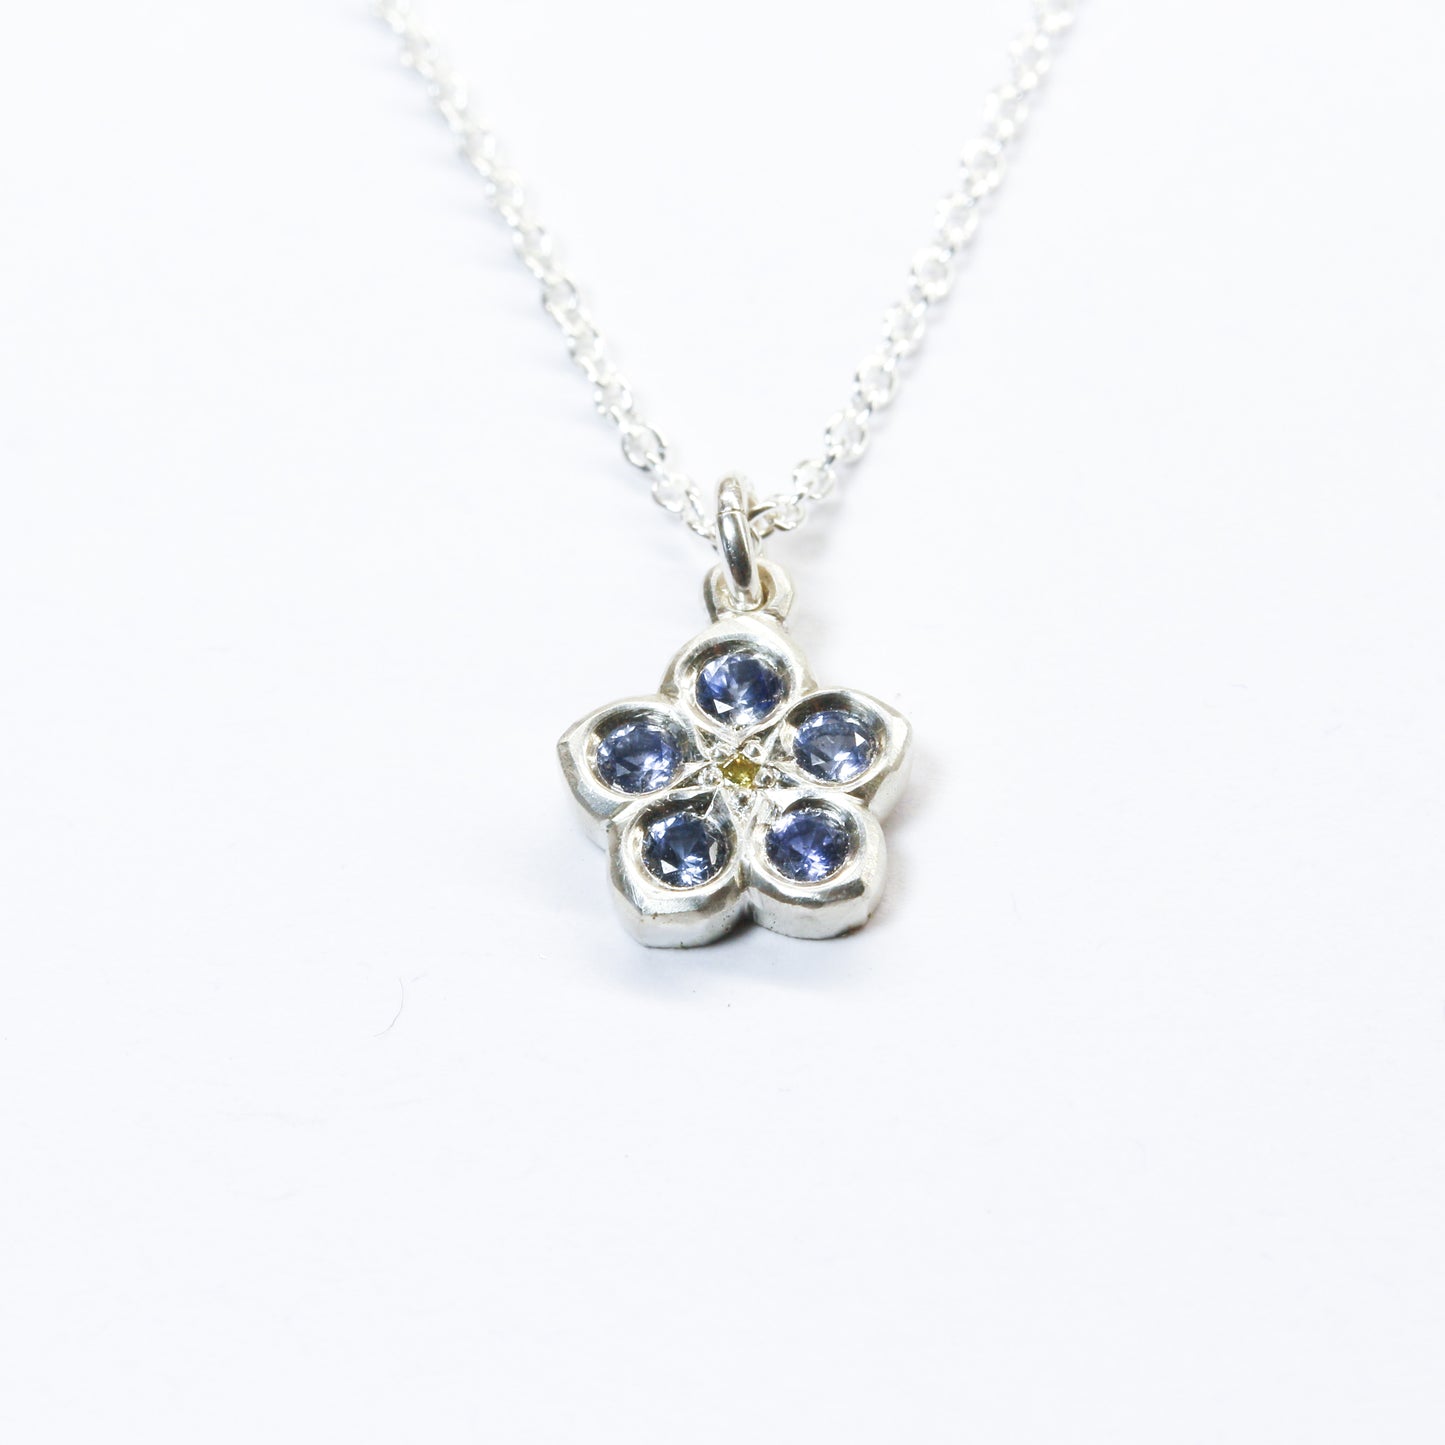 Forget me not sapphire and yellow diamond pendant